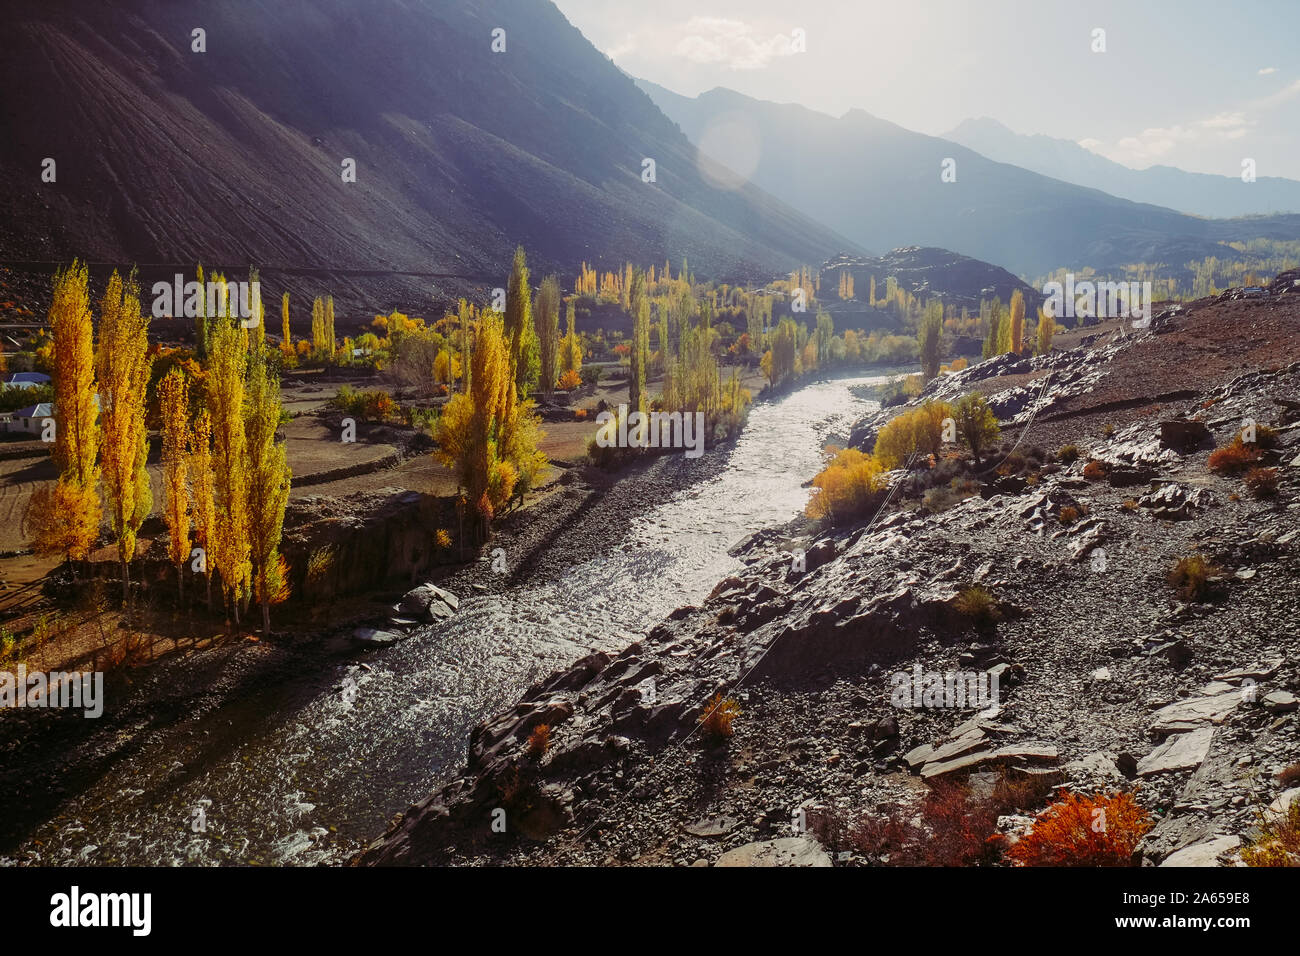 Morning sunlight shining on Gupis valley. Beautiful landscape view of colorful trees in autumn season with shiny Gilgit river against Hindu Kush mount Stock Photo